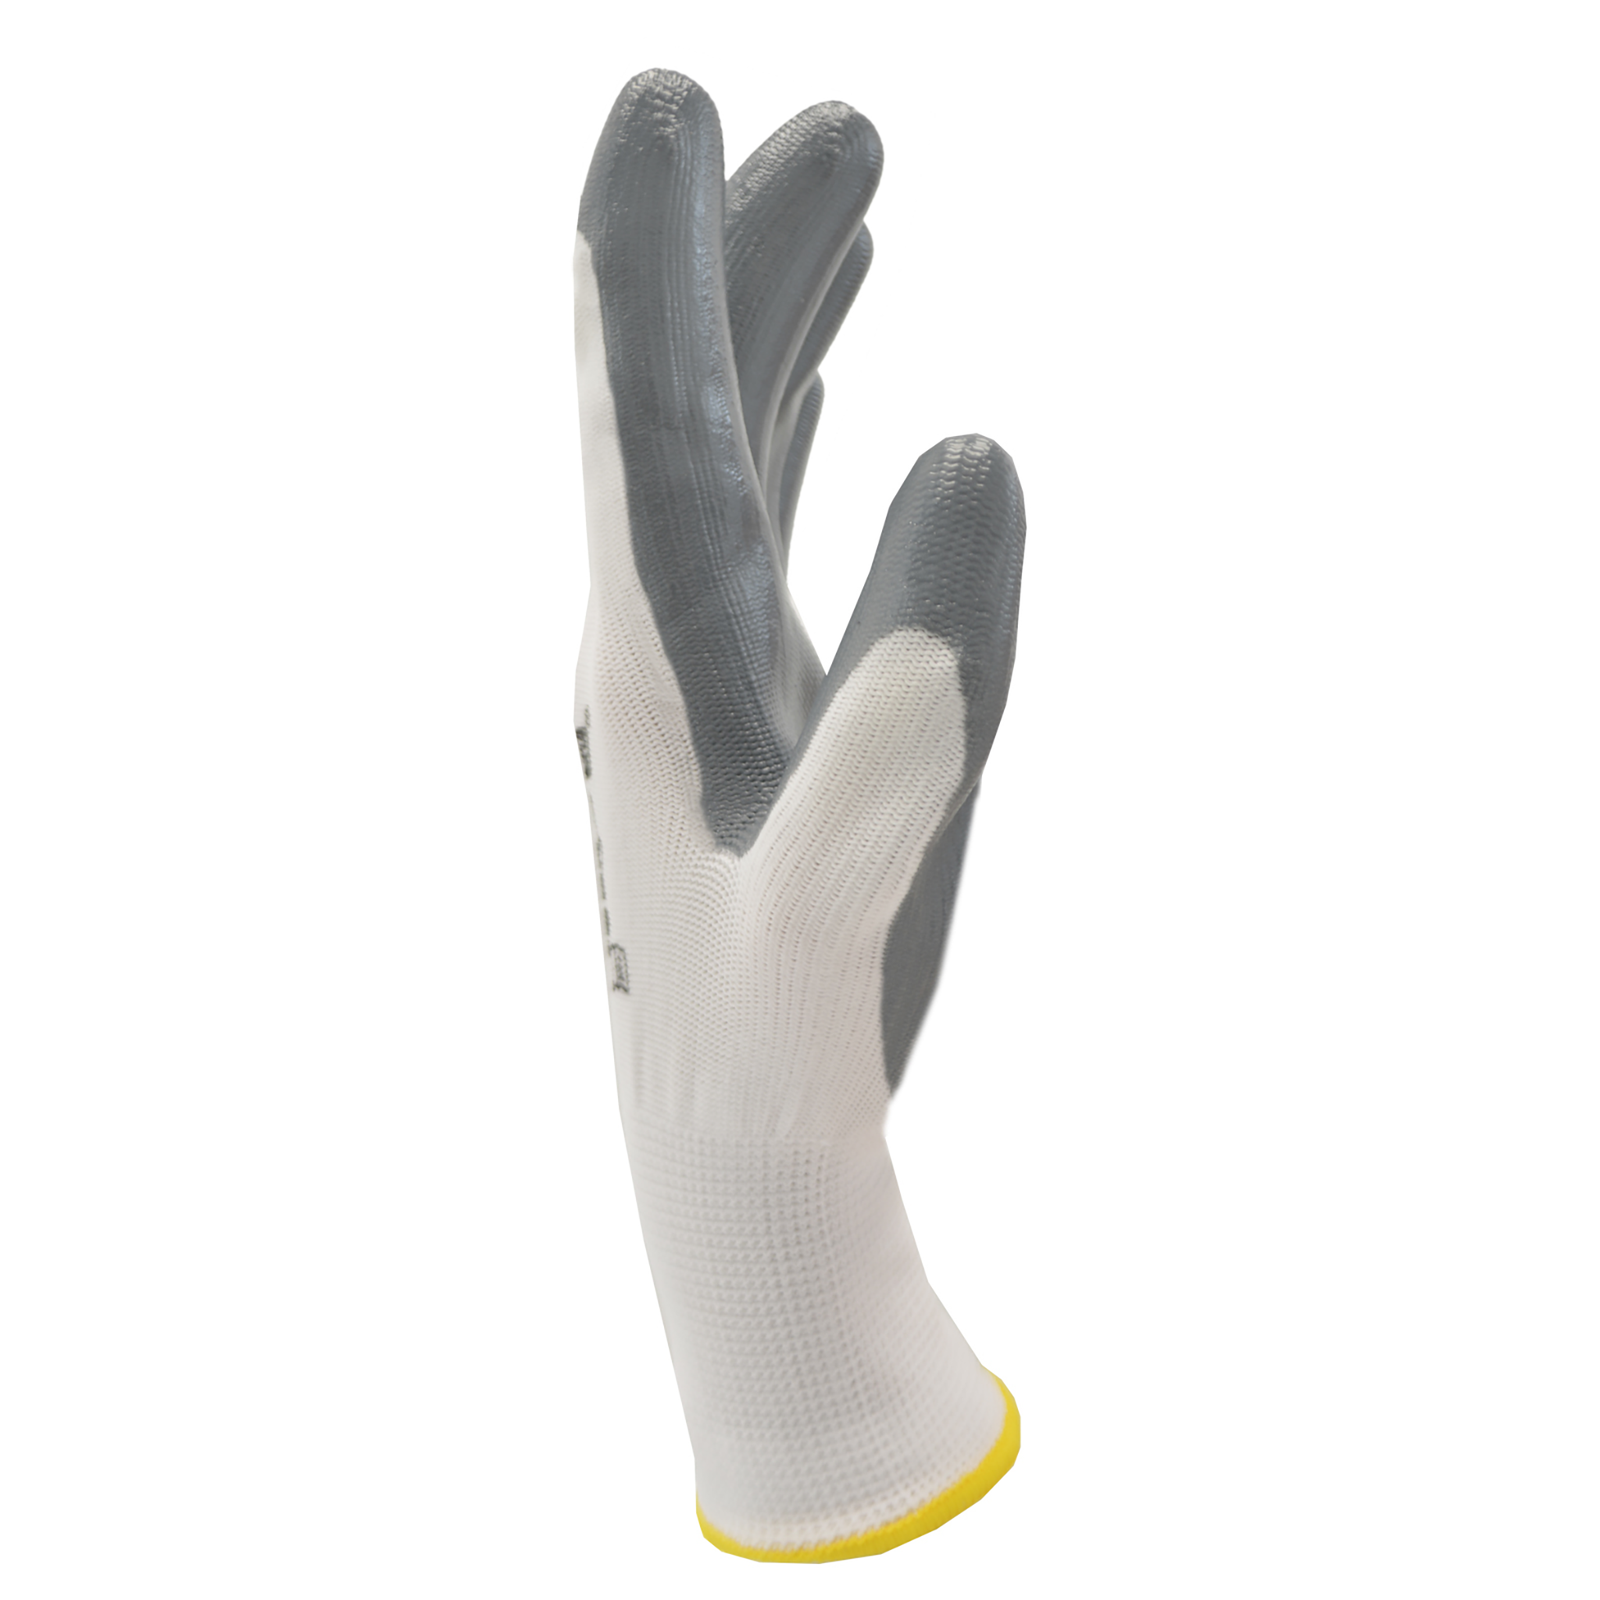 Side of one JORESTECH safety work glove with nitrile dipped palm